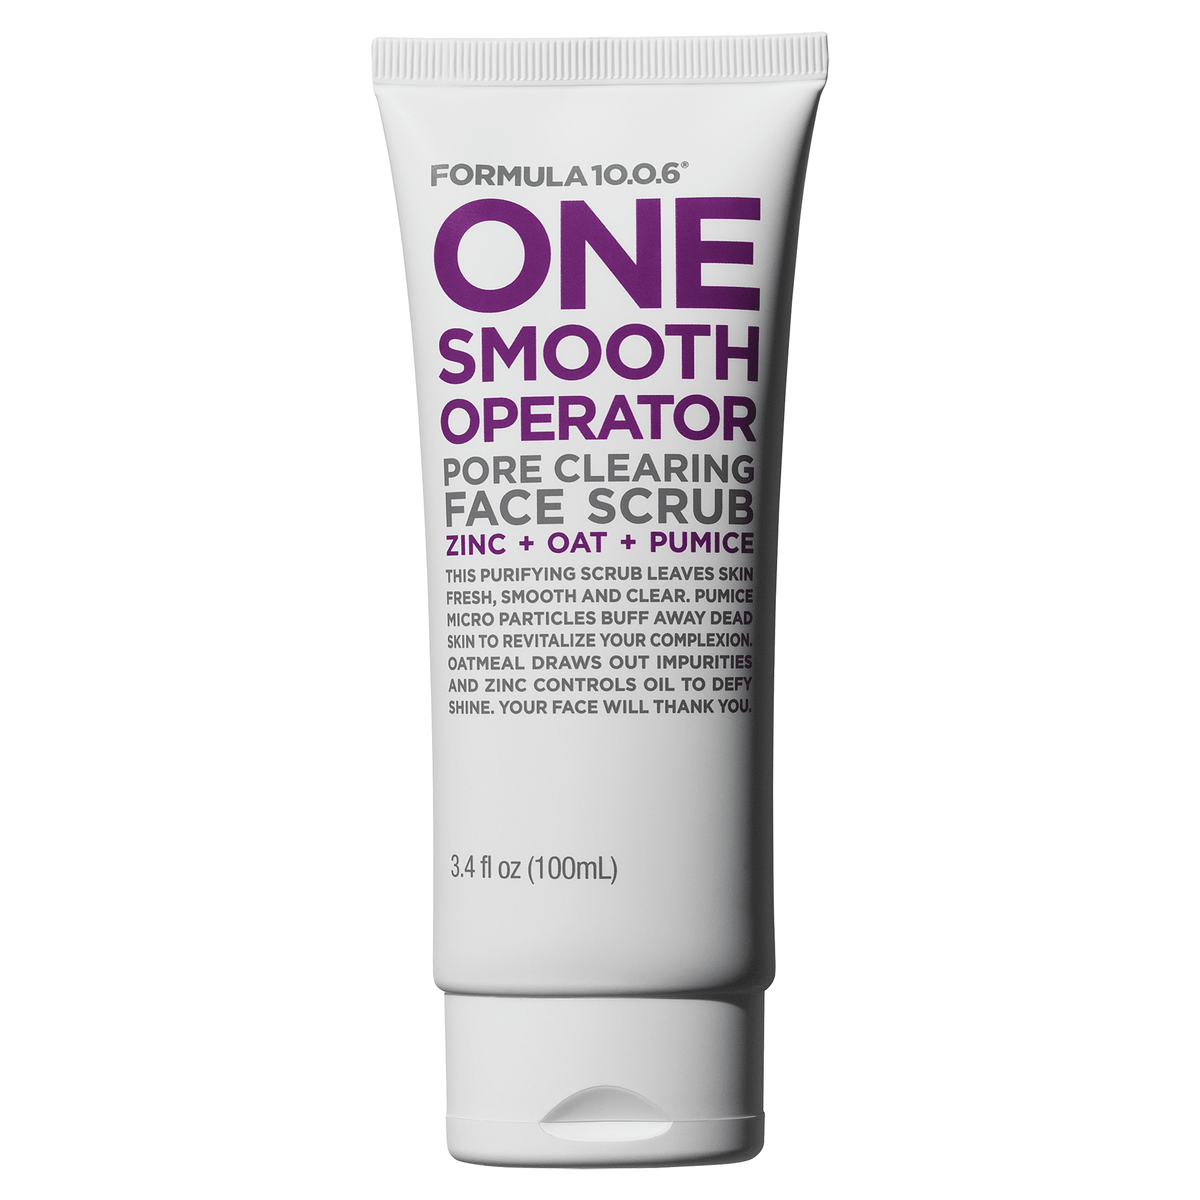 One Smooth Operator Pore Clearing Face Scrub